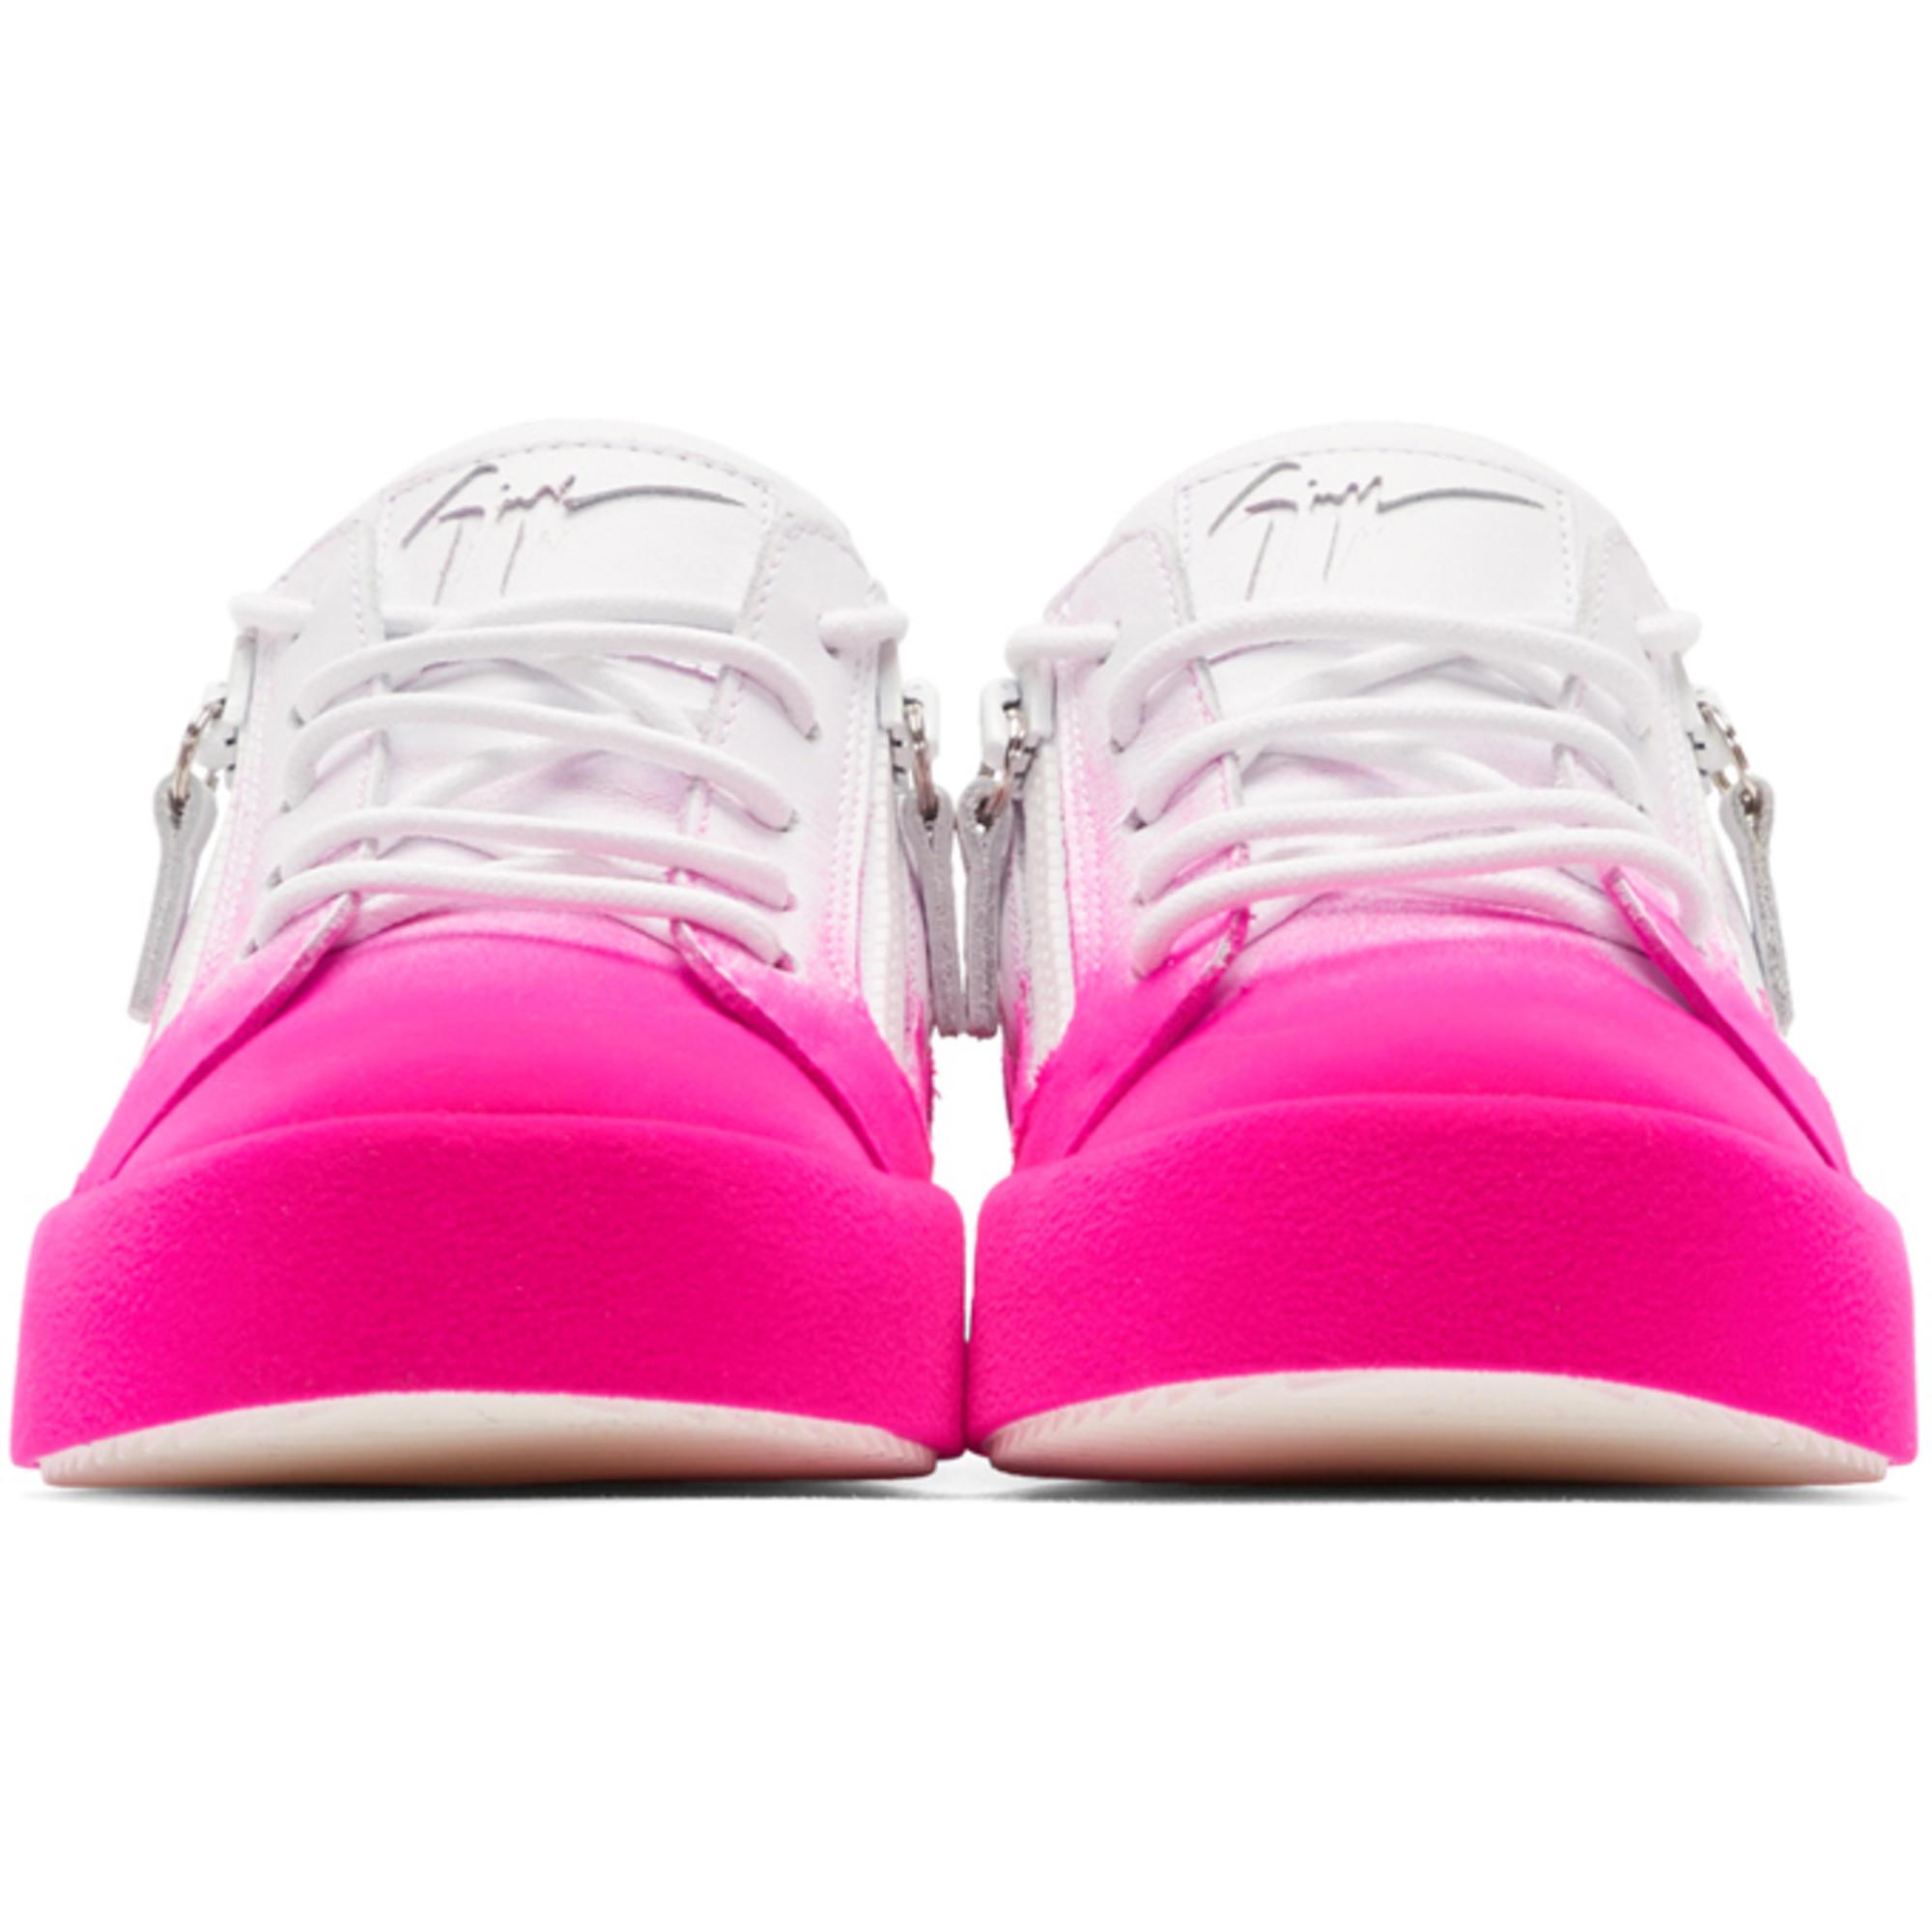 pink and white giuseppe